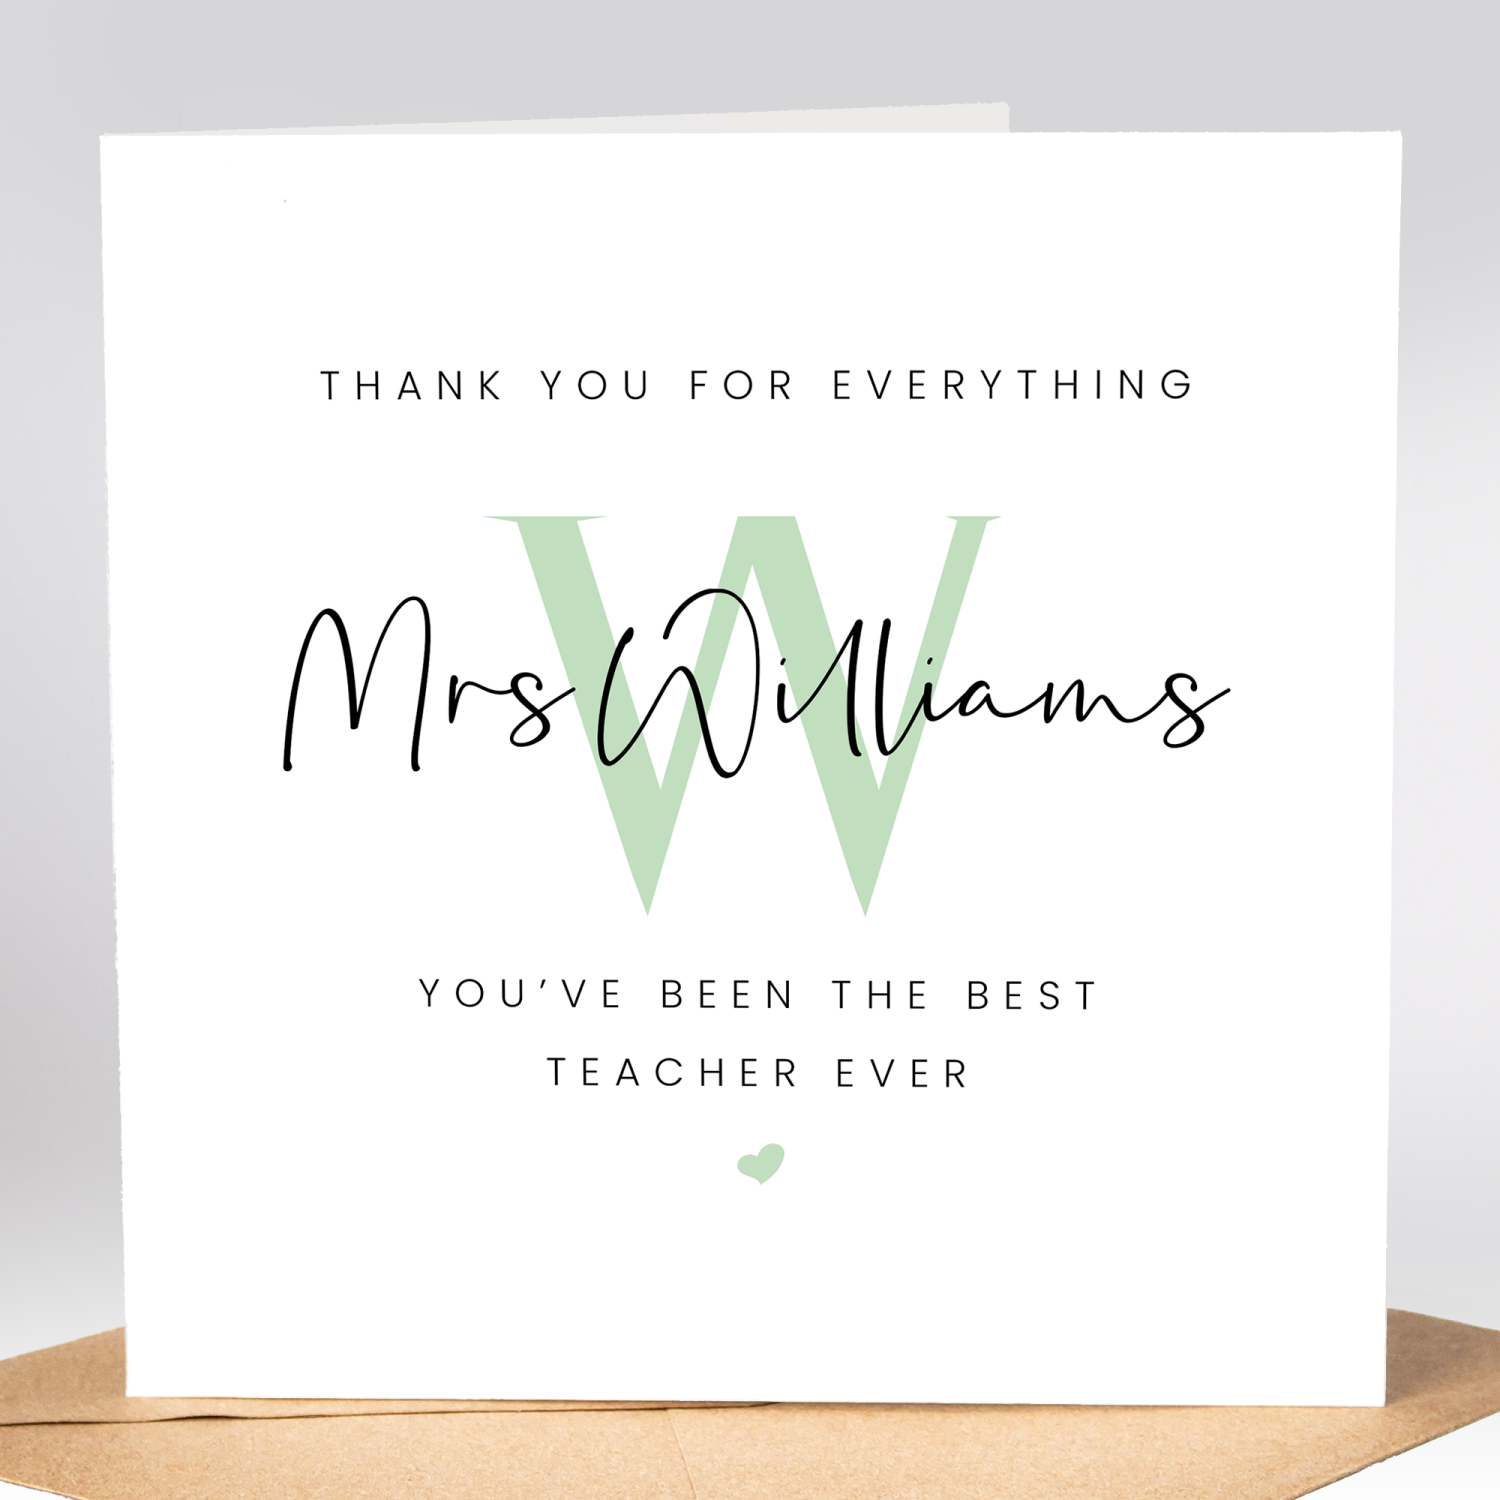 Thank You For Everything, You've Been The Best Teacher Ever, Personalised Teacher Card